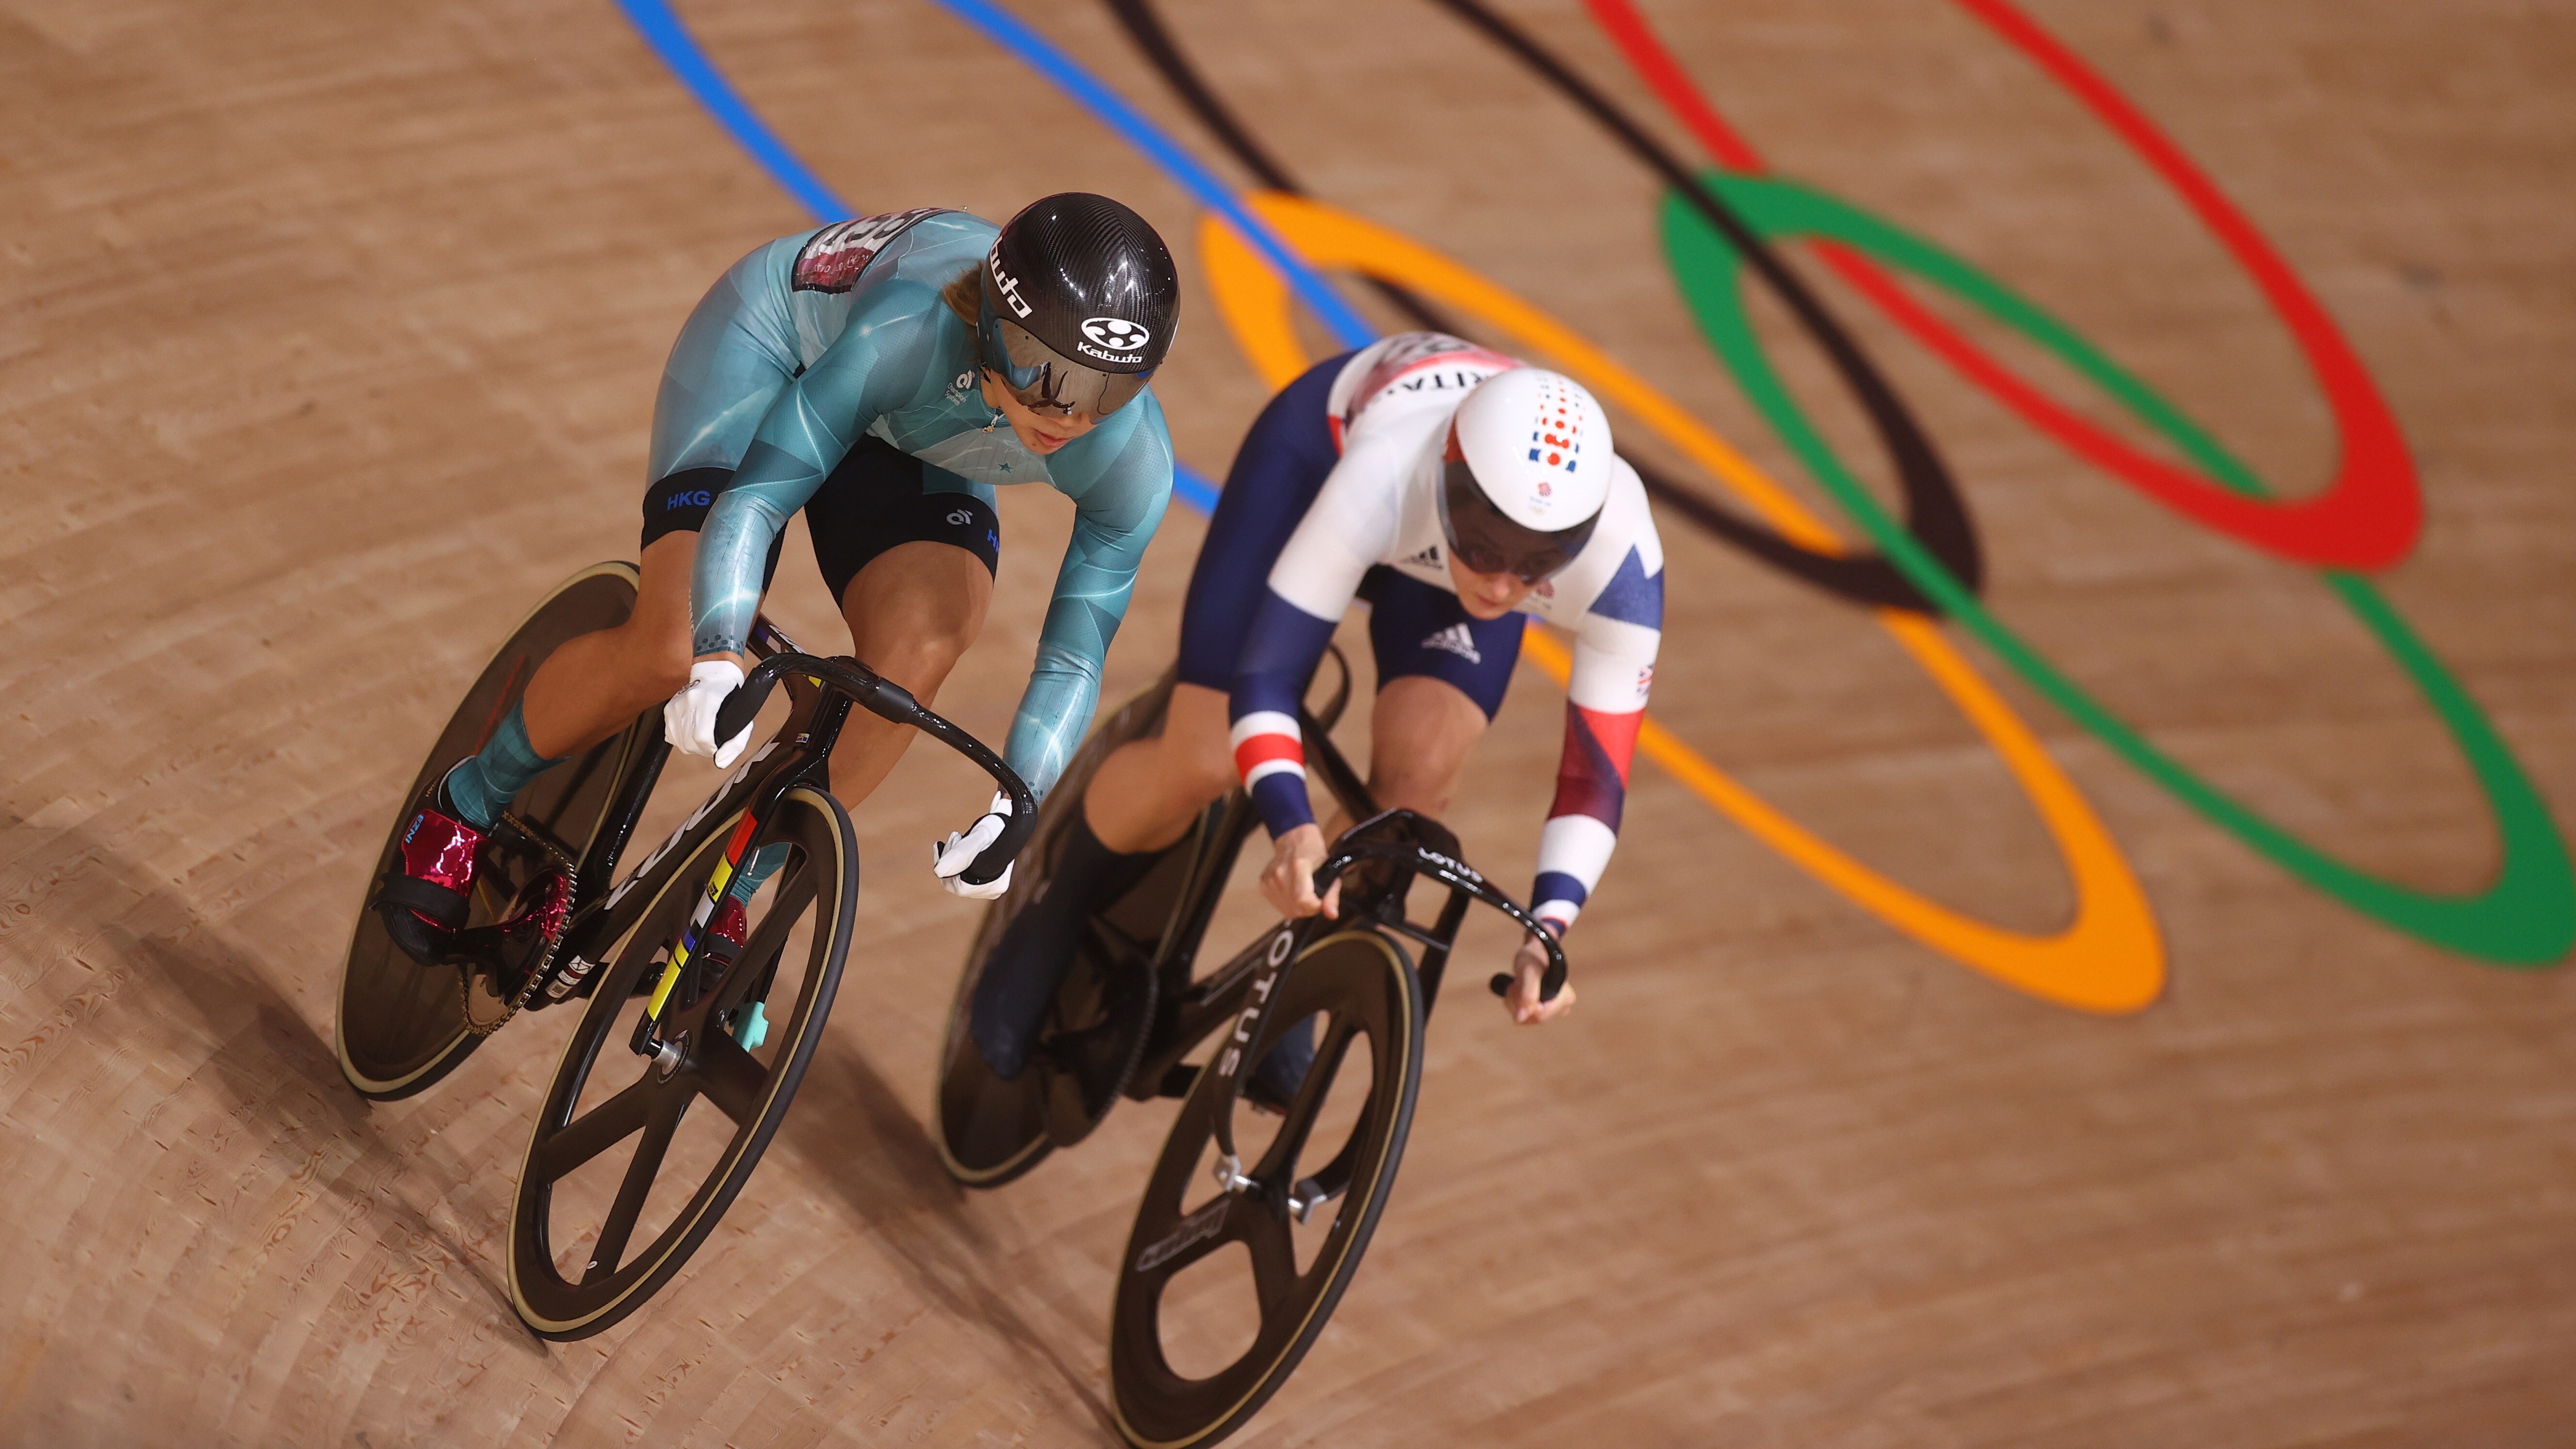 Sarah Lee Wai-sze gets the better of Katy Marchant of Great Britain in their quarter-final of the sprint at Izu Velodrome in Japan. Photo: Reuters